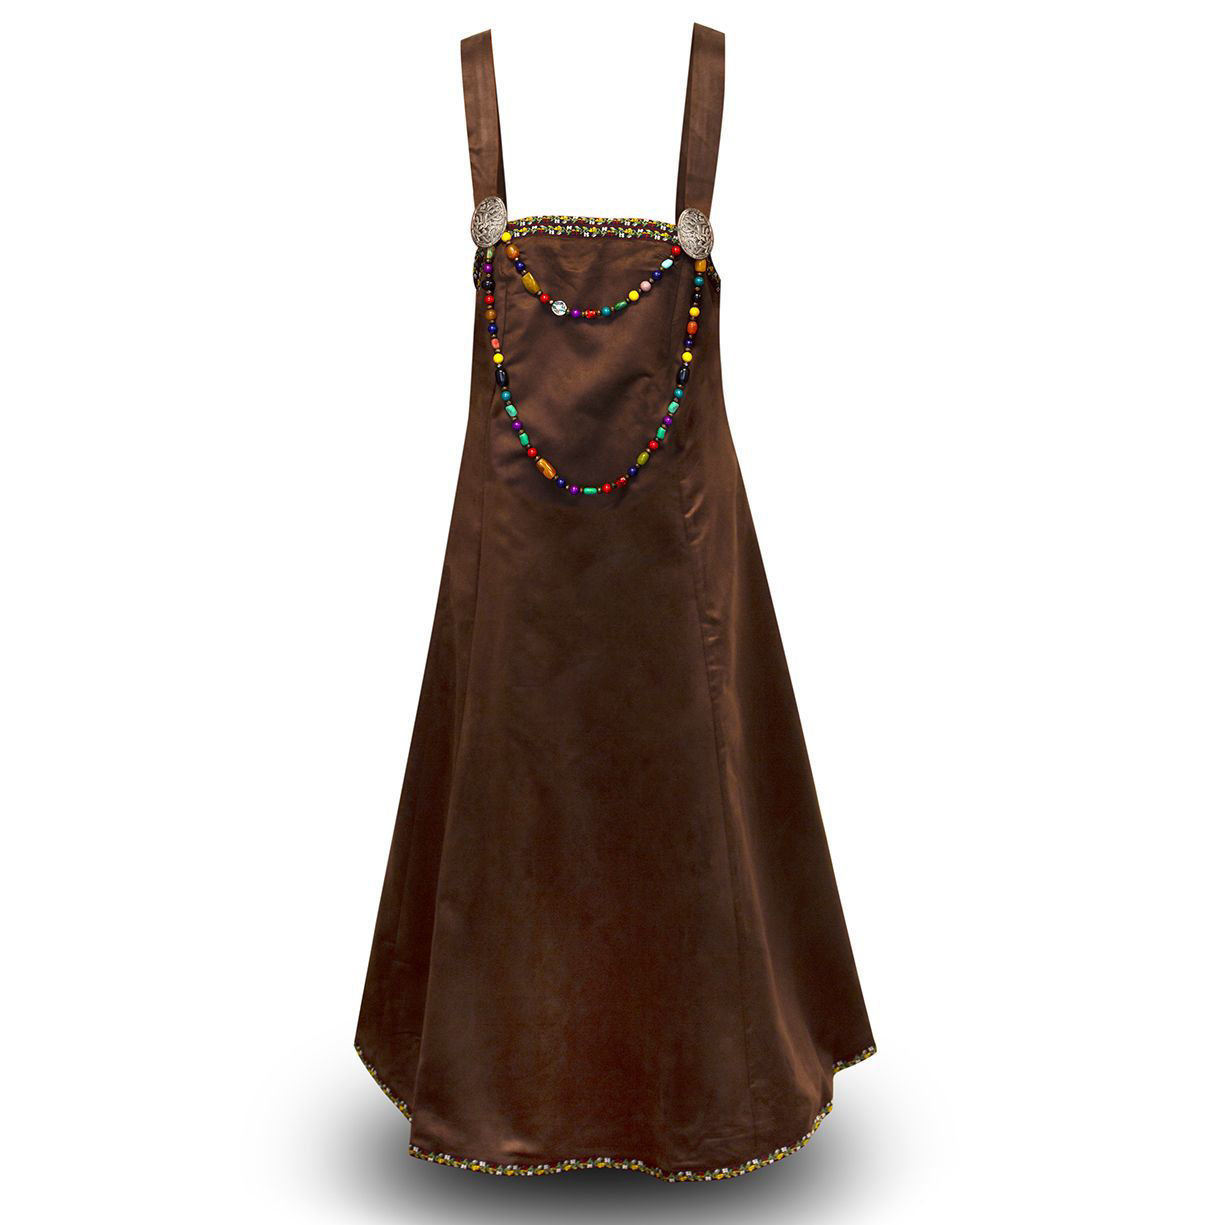 Astrid Viking Apron overdress trimmed with embroidery work, silver-colored brooches with long strand of beads to hang between